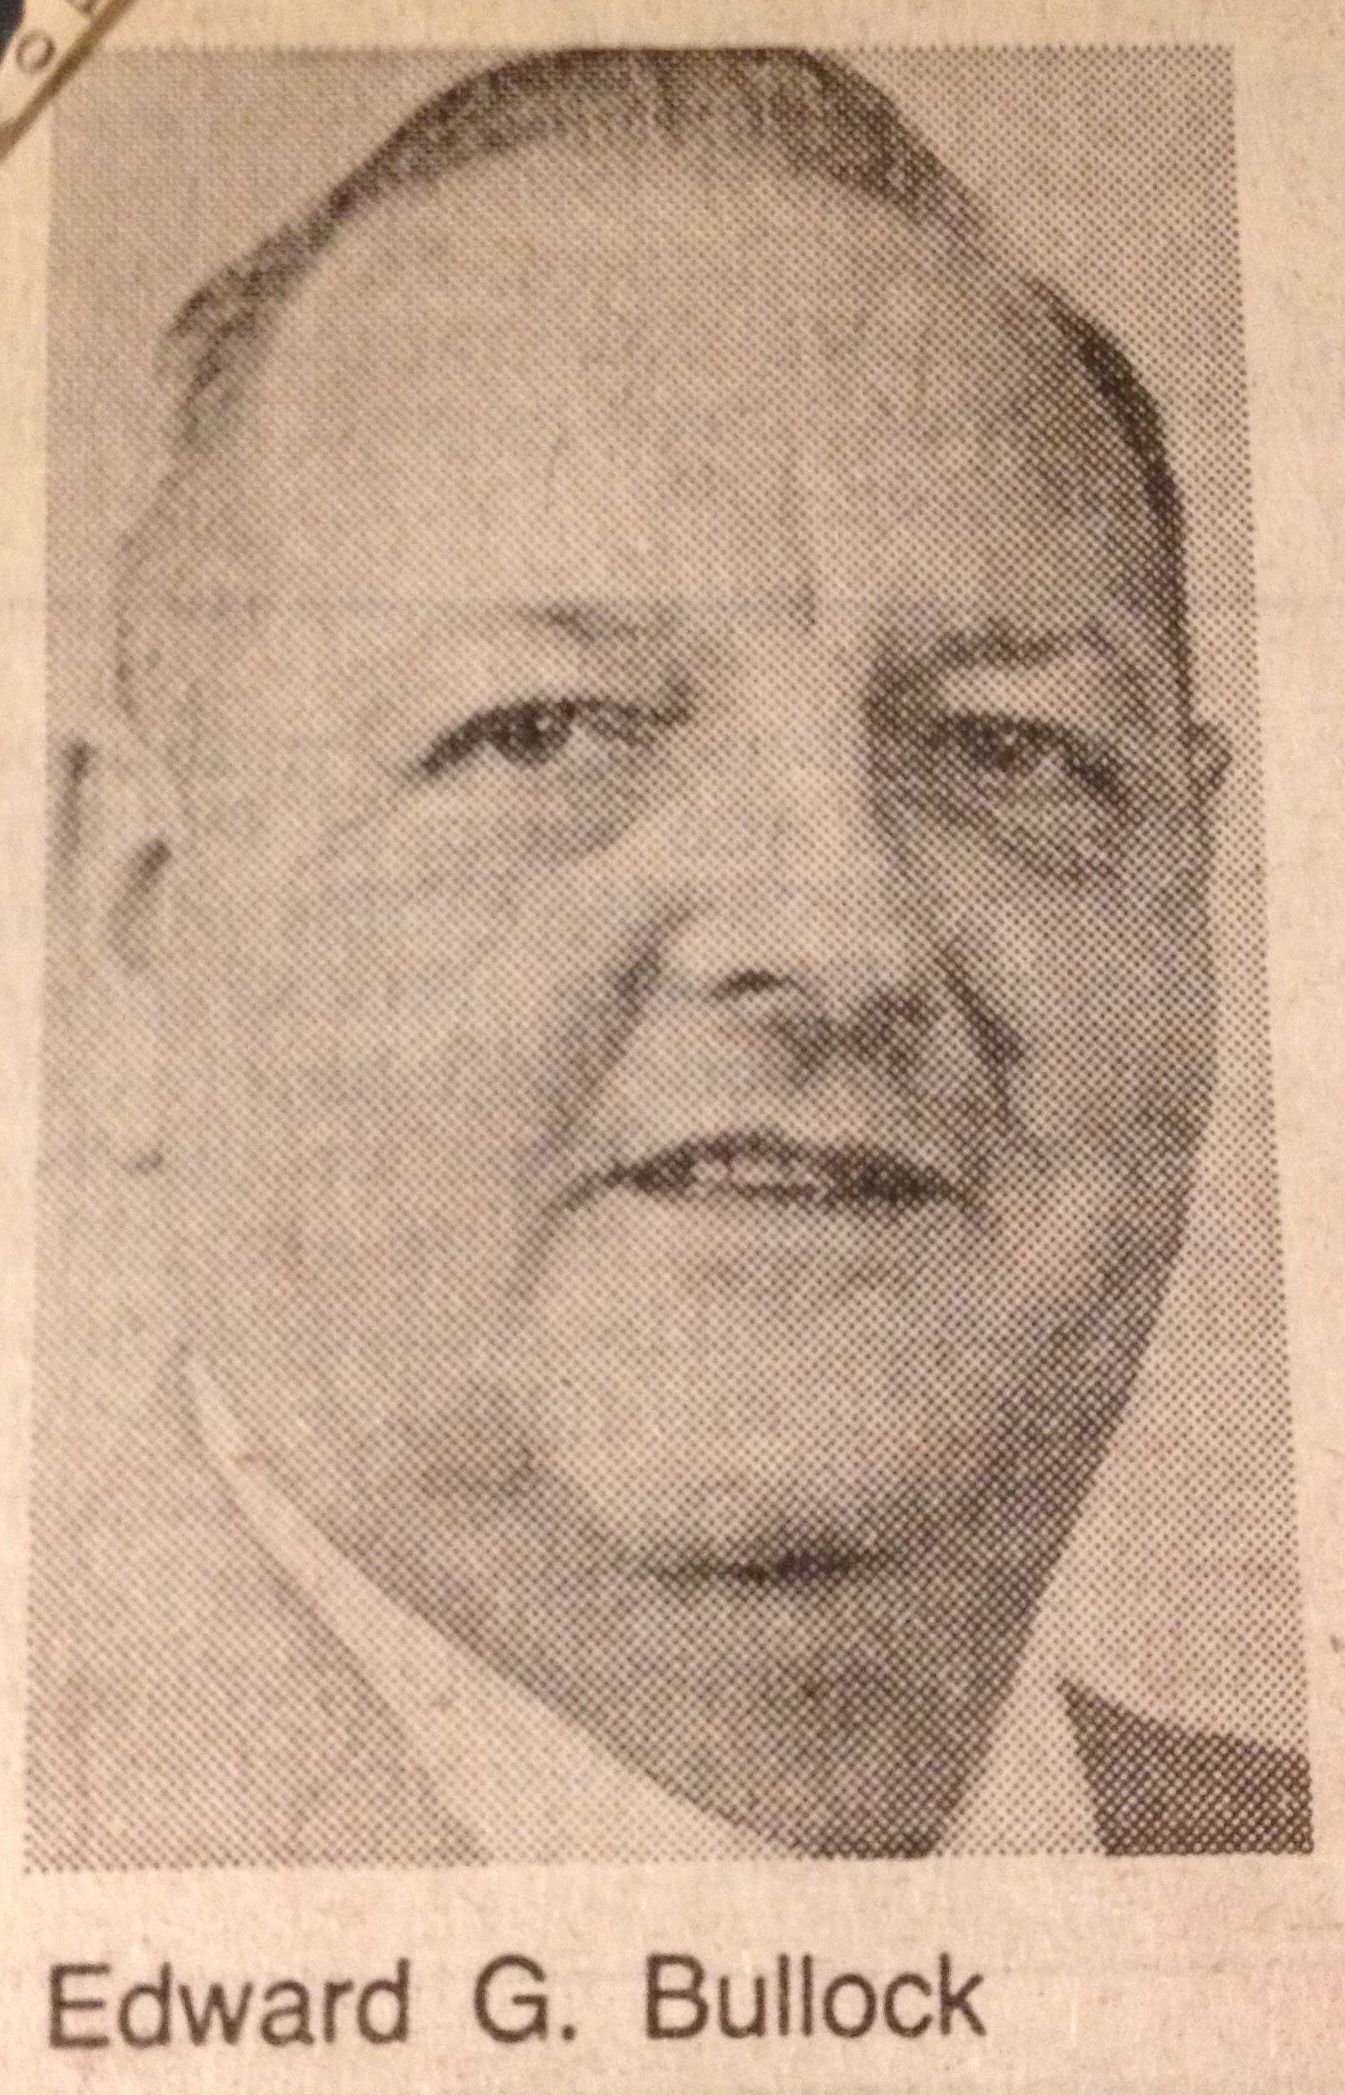 In 1985, the now-55-year-old Edward Bullock ran for a second term as Warren County's sheriff and won.